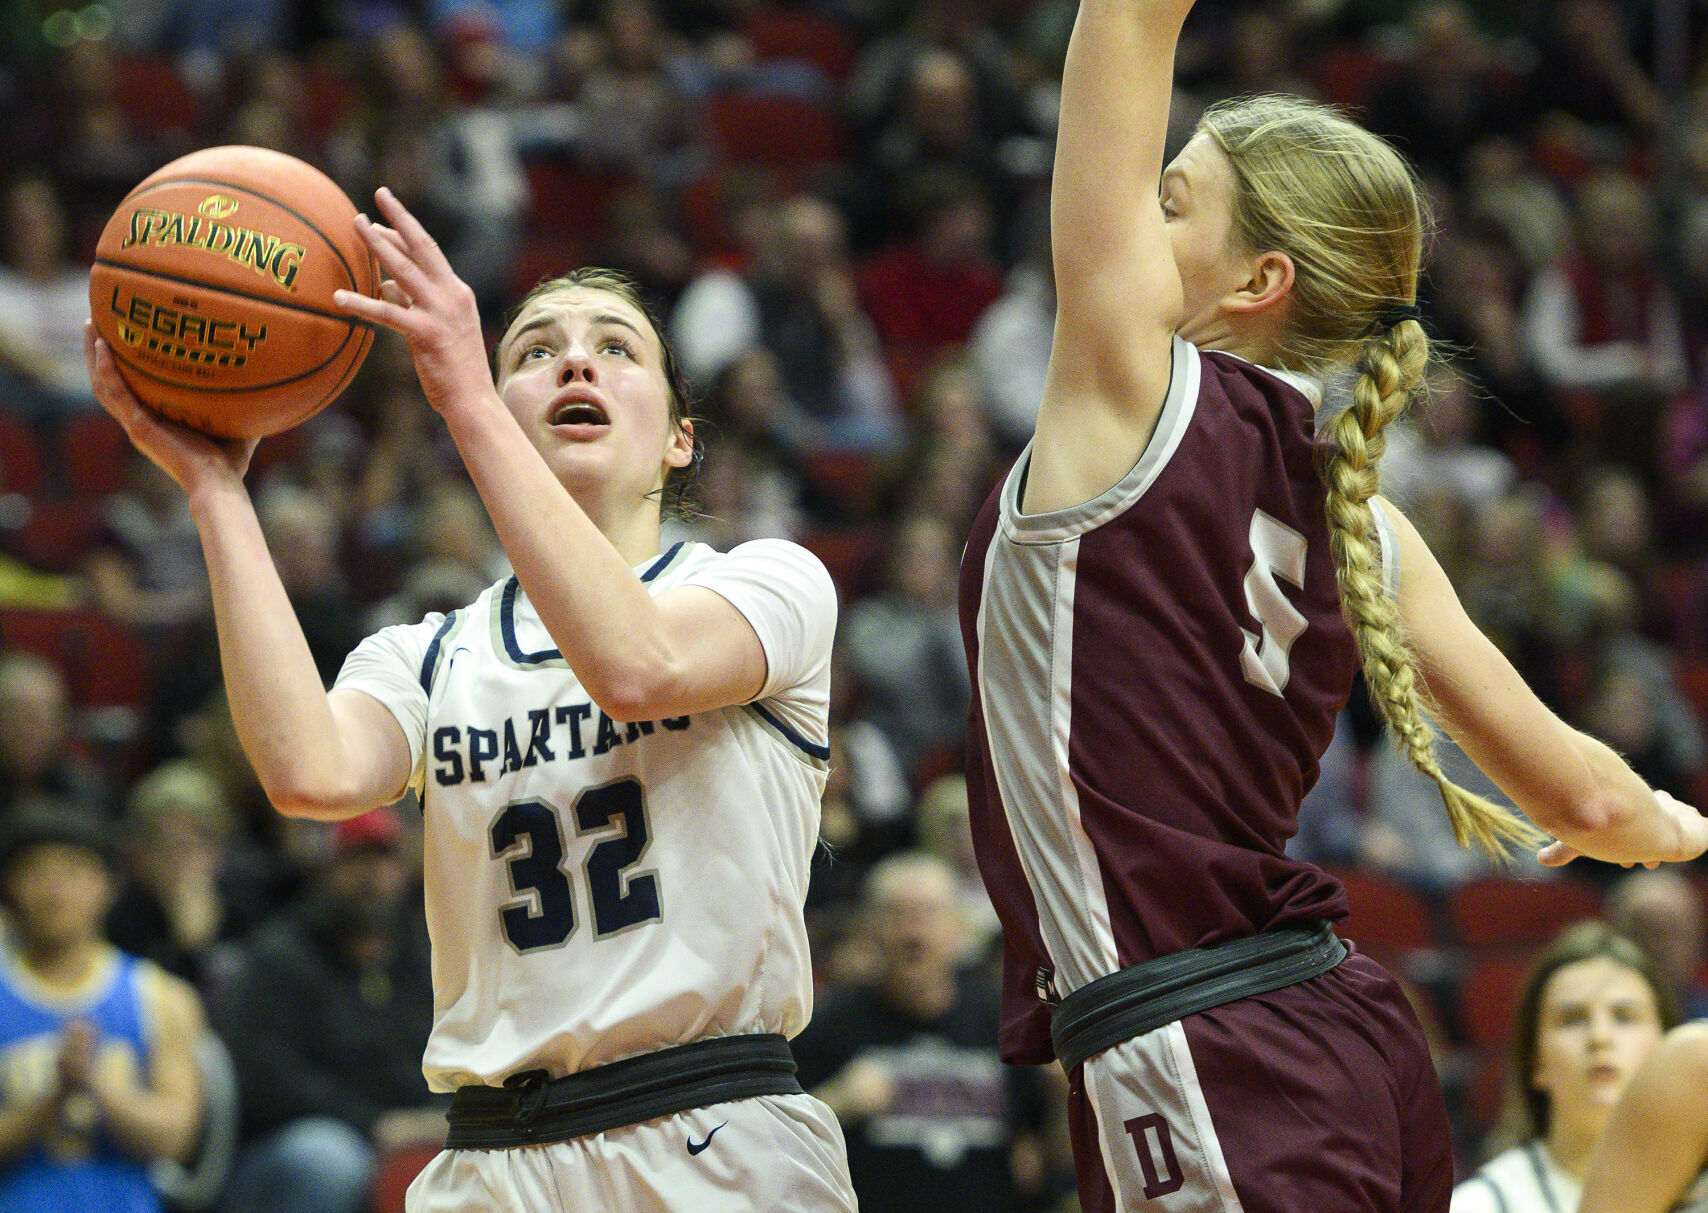 Addy Maurer sparks Pleasant Valley to a 62-43 victory in Class 5A regional opener